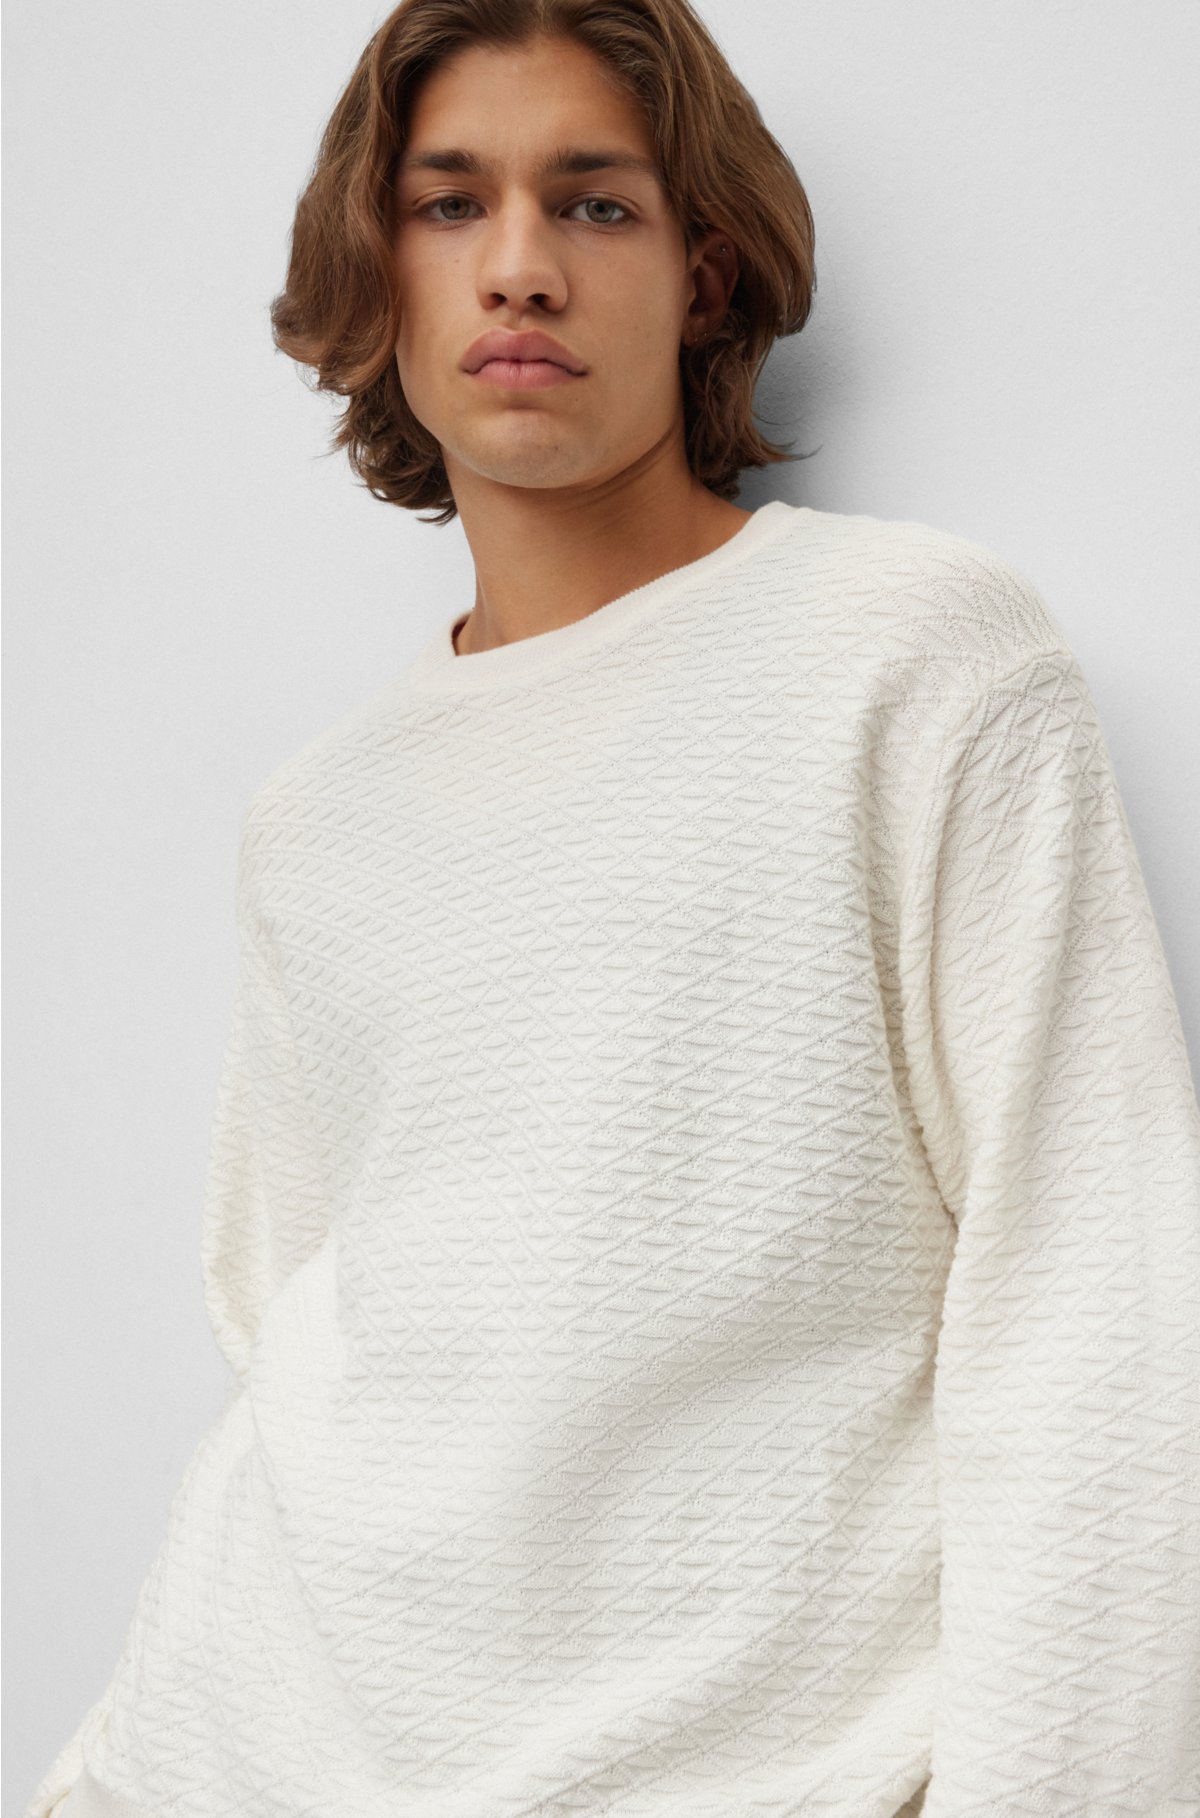 Relaxed-fit sweater in cotton with knitted structure, White